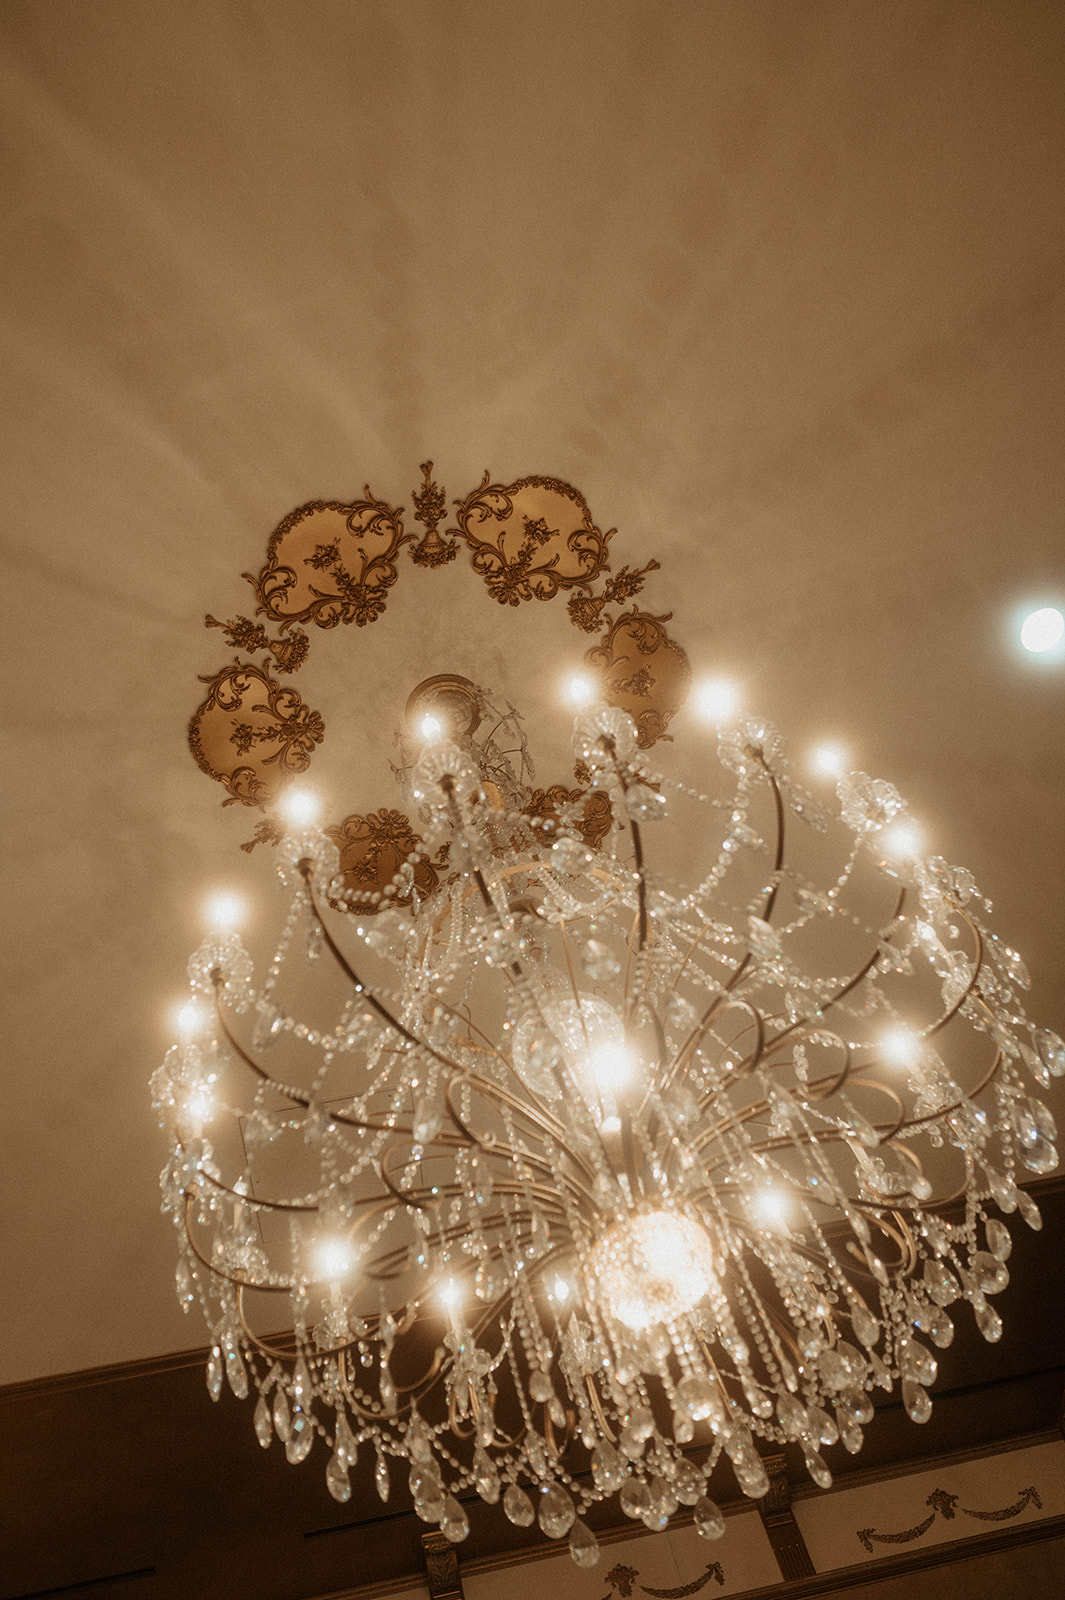 An ornate chandelier with crystal decorations and multiple lit bulbs hangs from a ceiling adorned with decorative moldings.